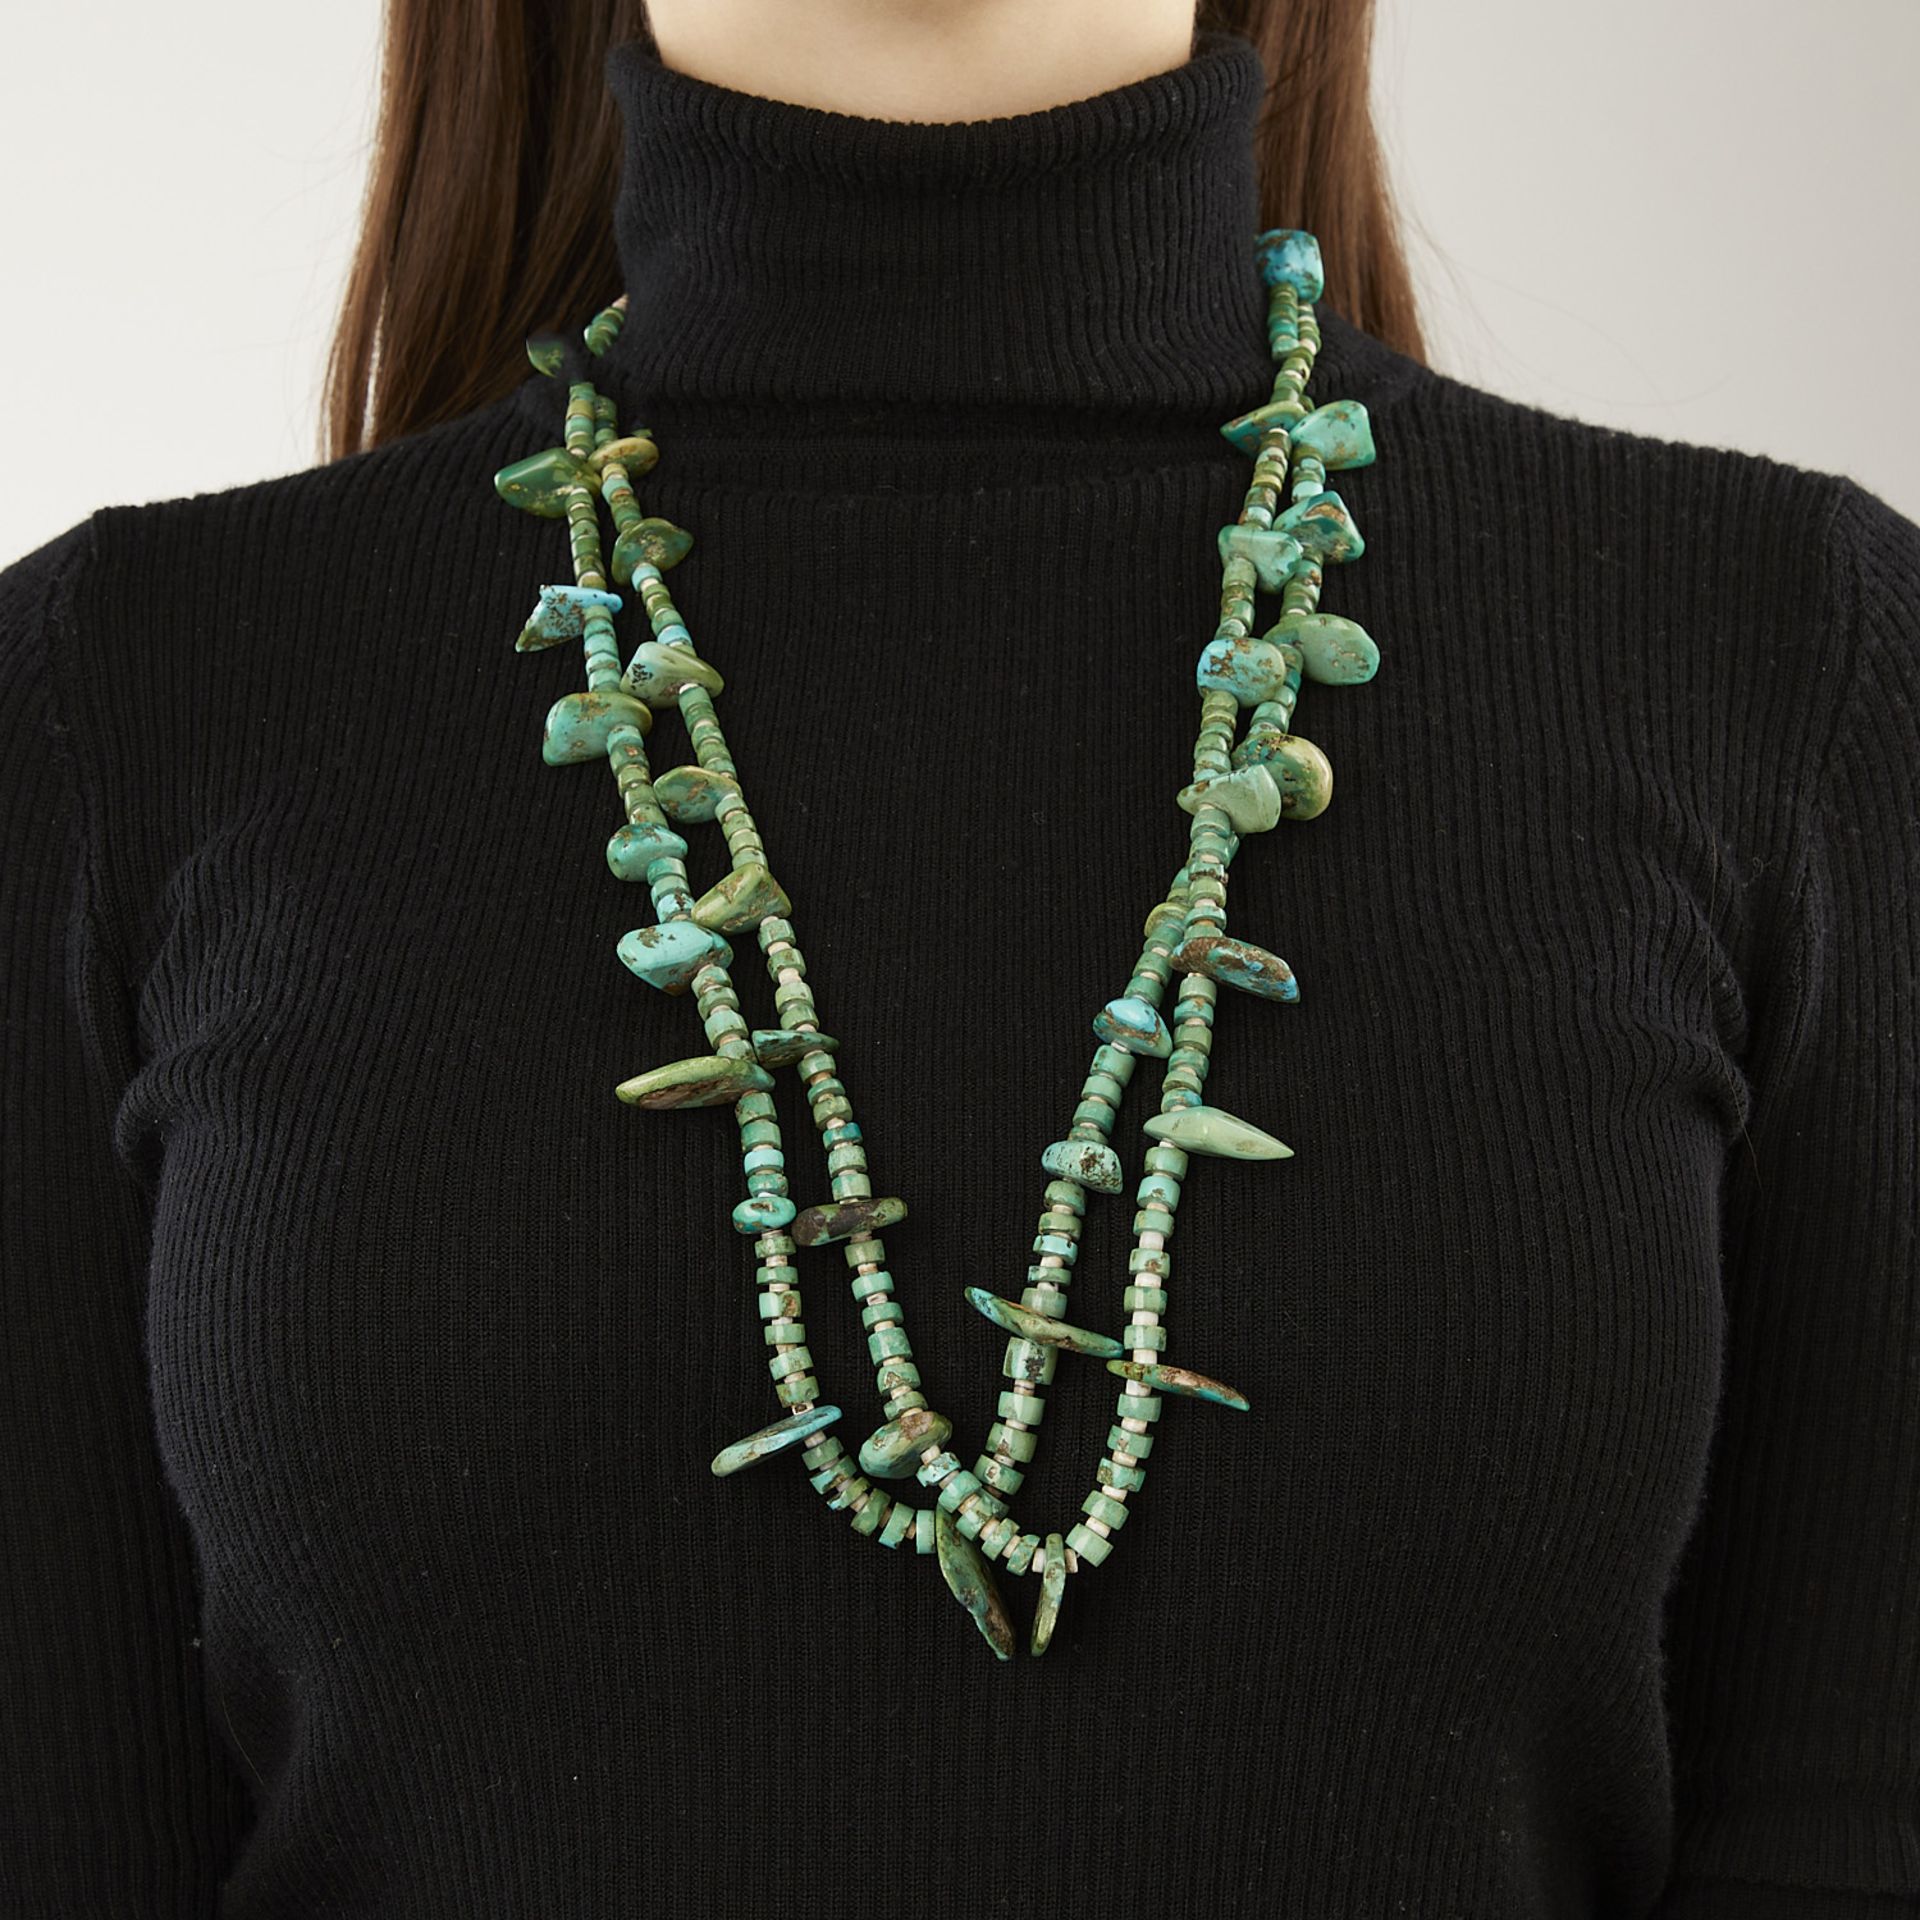 Two Strand Turquoise Heishi Necklace - Image 2 of 6